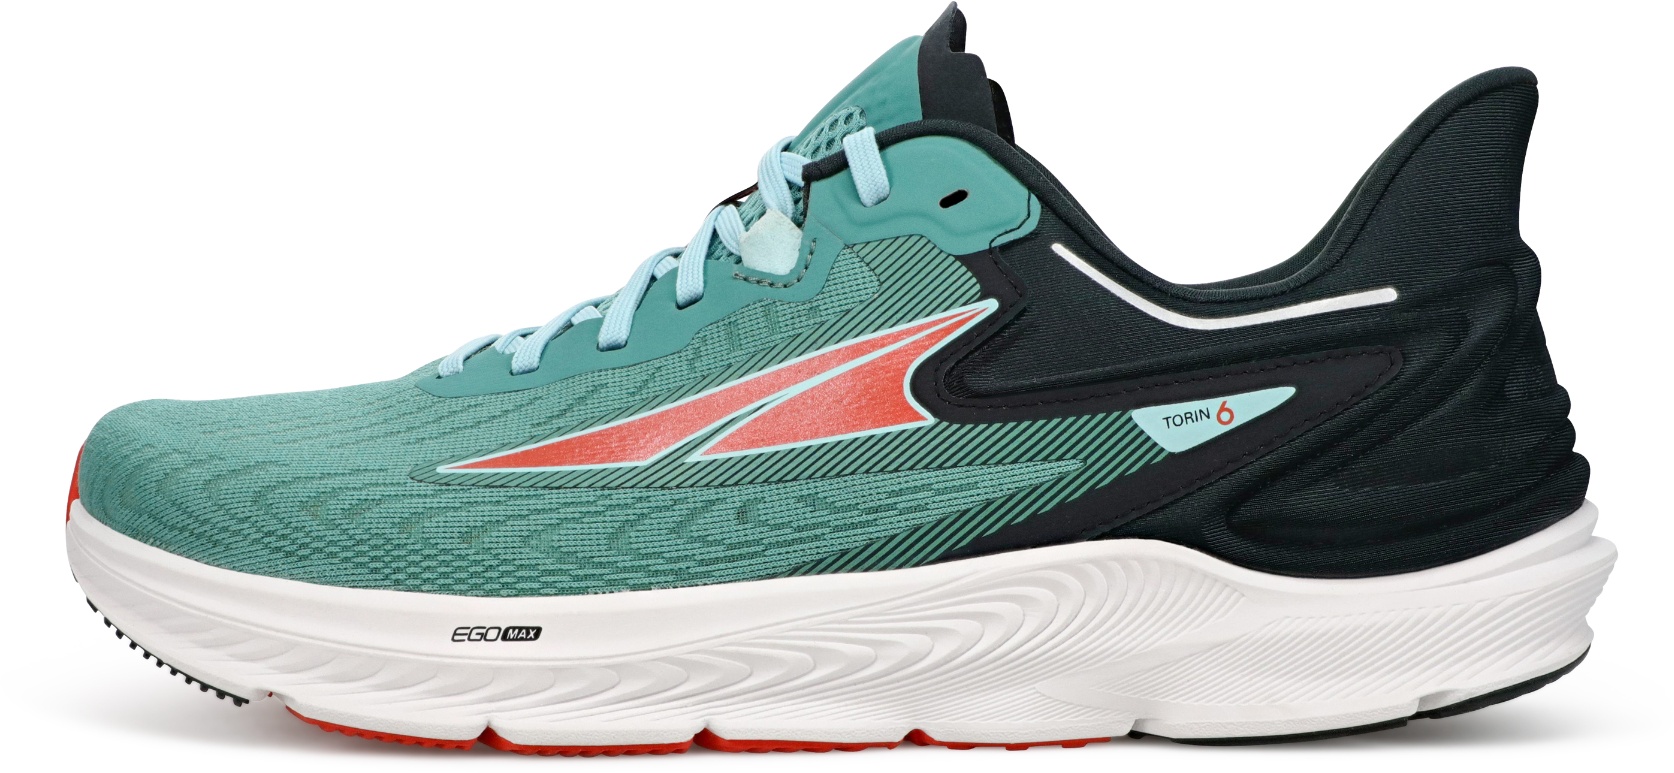 Altra M TORIN 6 DUSTY TEAL - 44.5